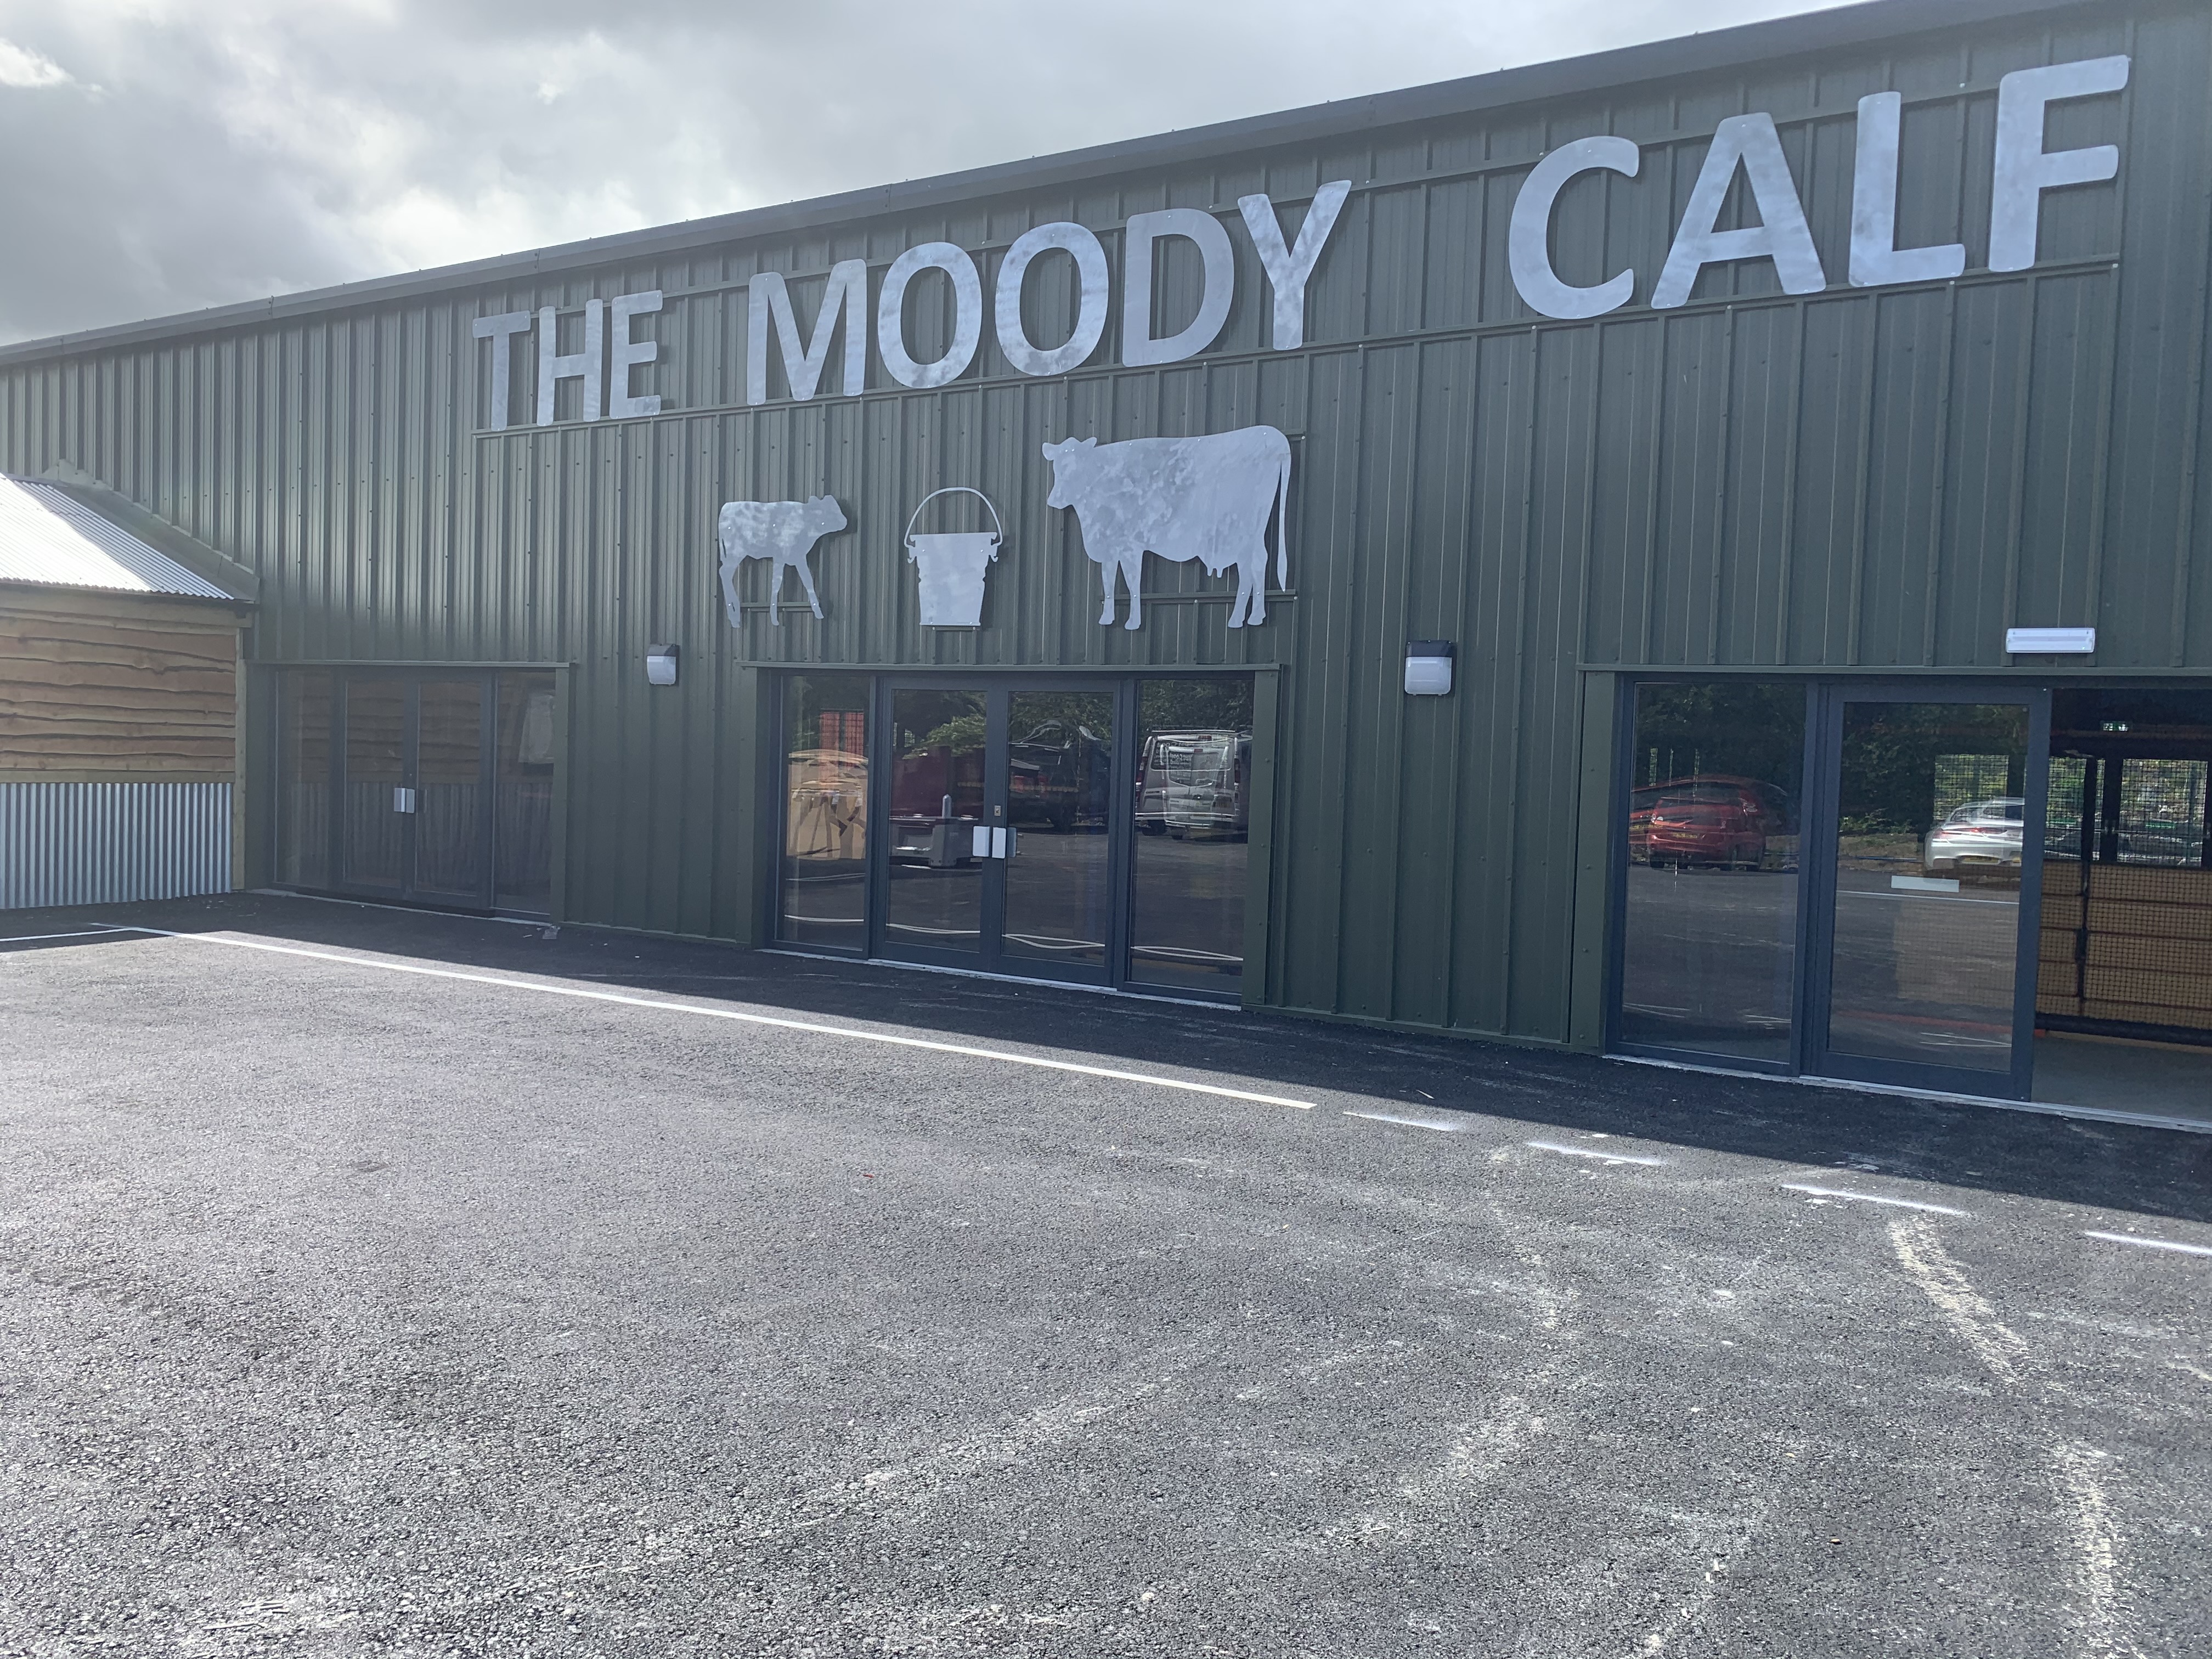 The Moody Cafe